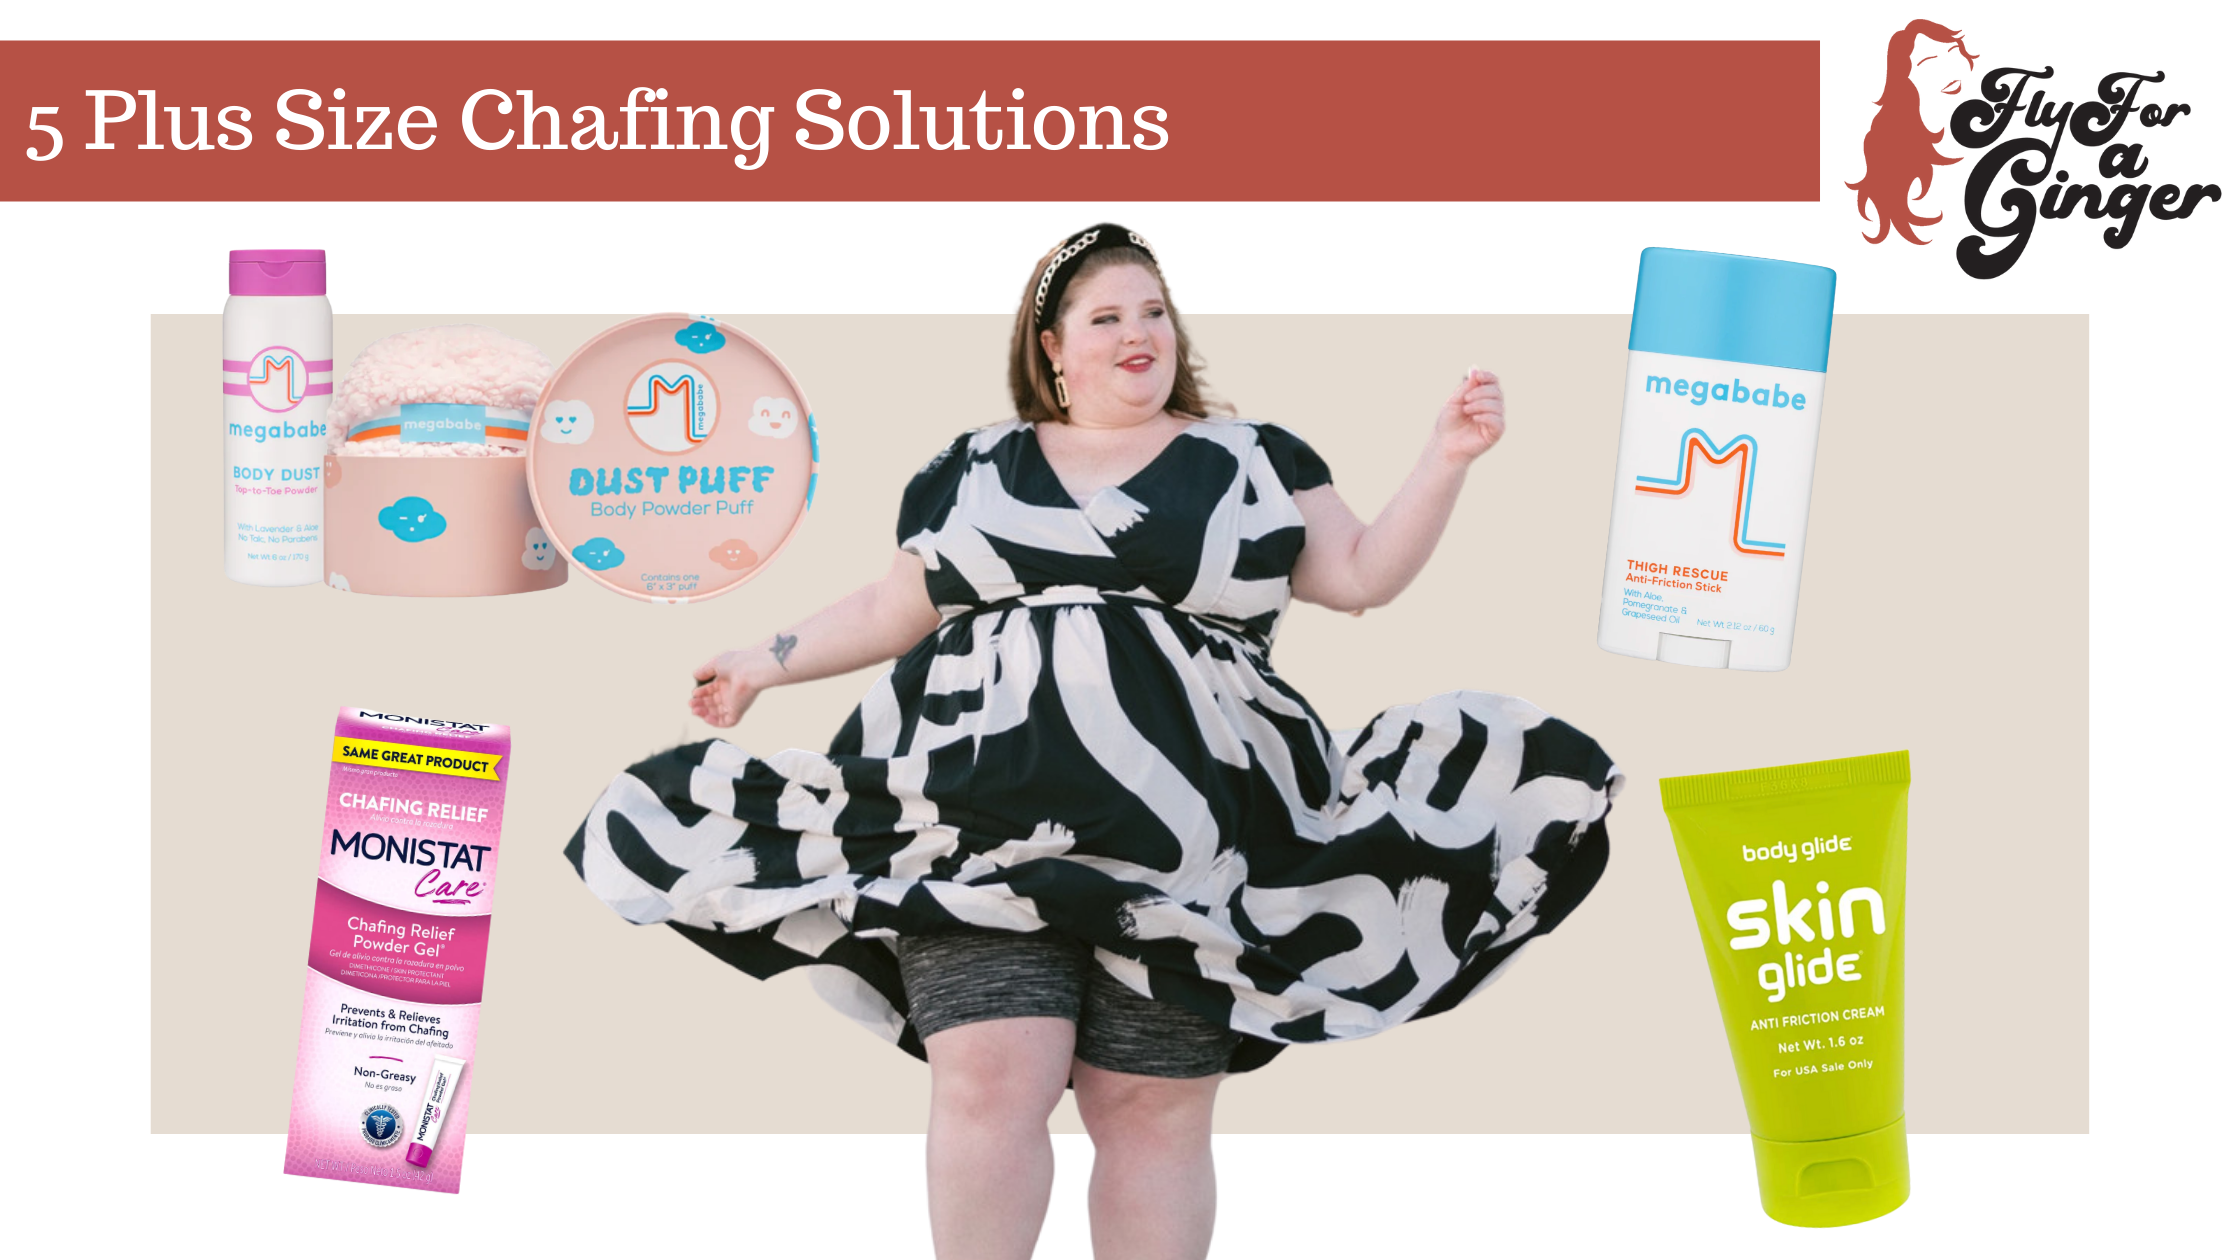 What to Wear Under a Dress to Stop Chafing - No More Chafe - Thigh Guards